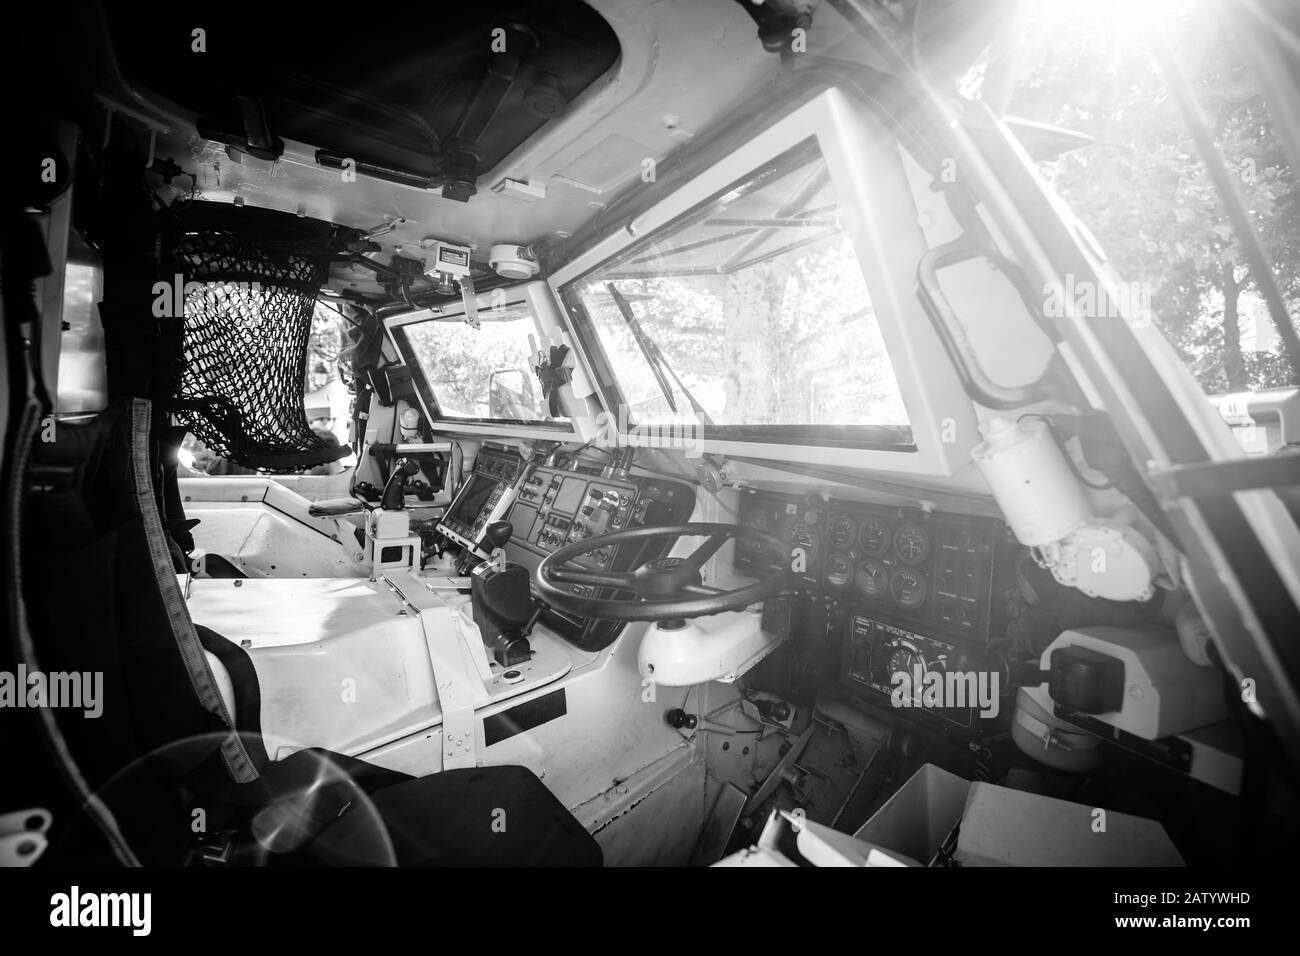 Strasbourg, France - Sep 21, 2019: Monochrome image of Empty driver's seat of French Army Petit vehicule protege Armoured Infantry Fighting Vehicle Manufactured by Panhard Stock Photo